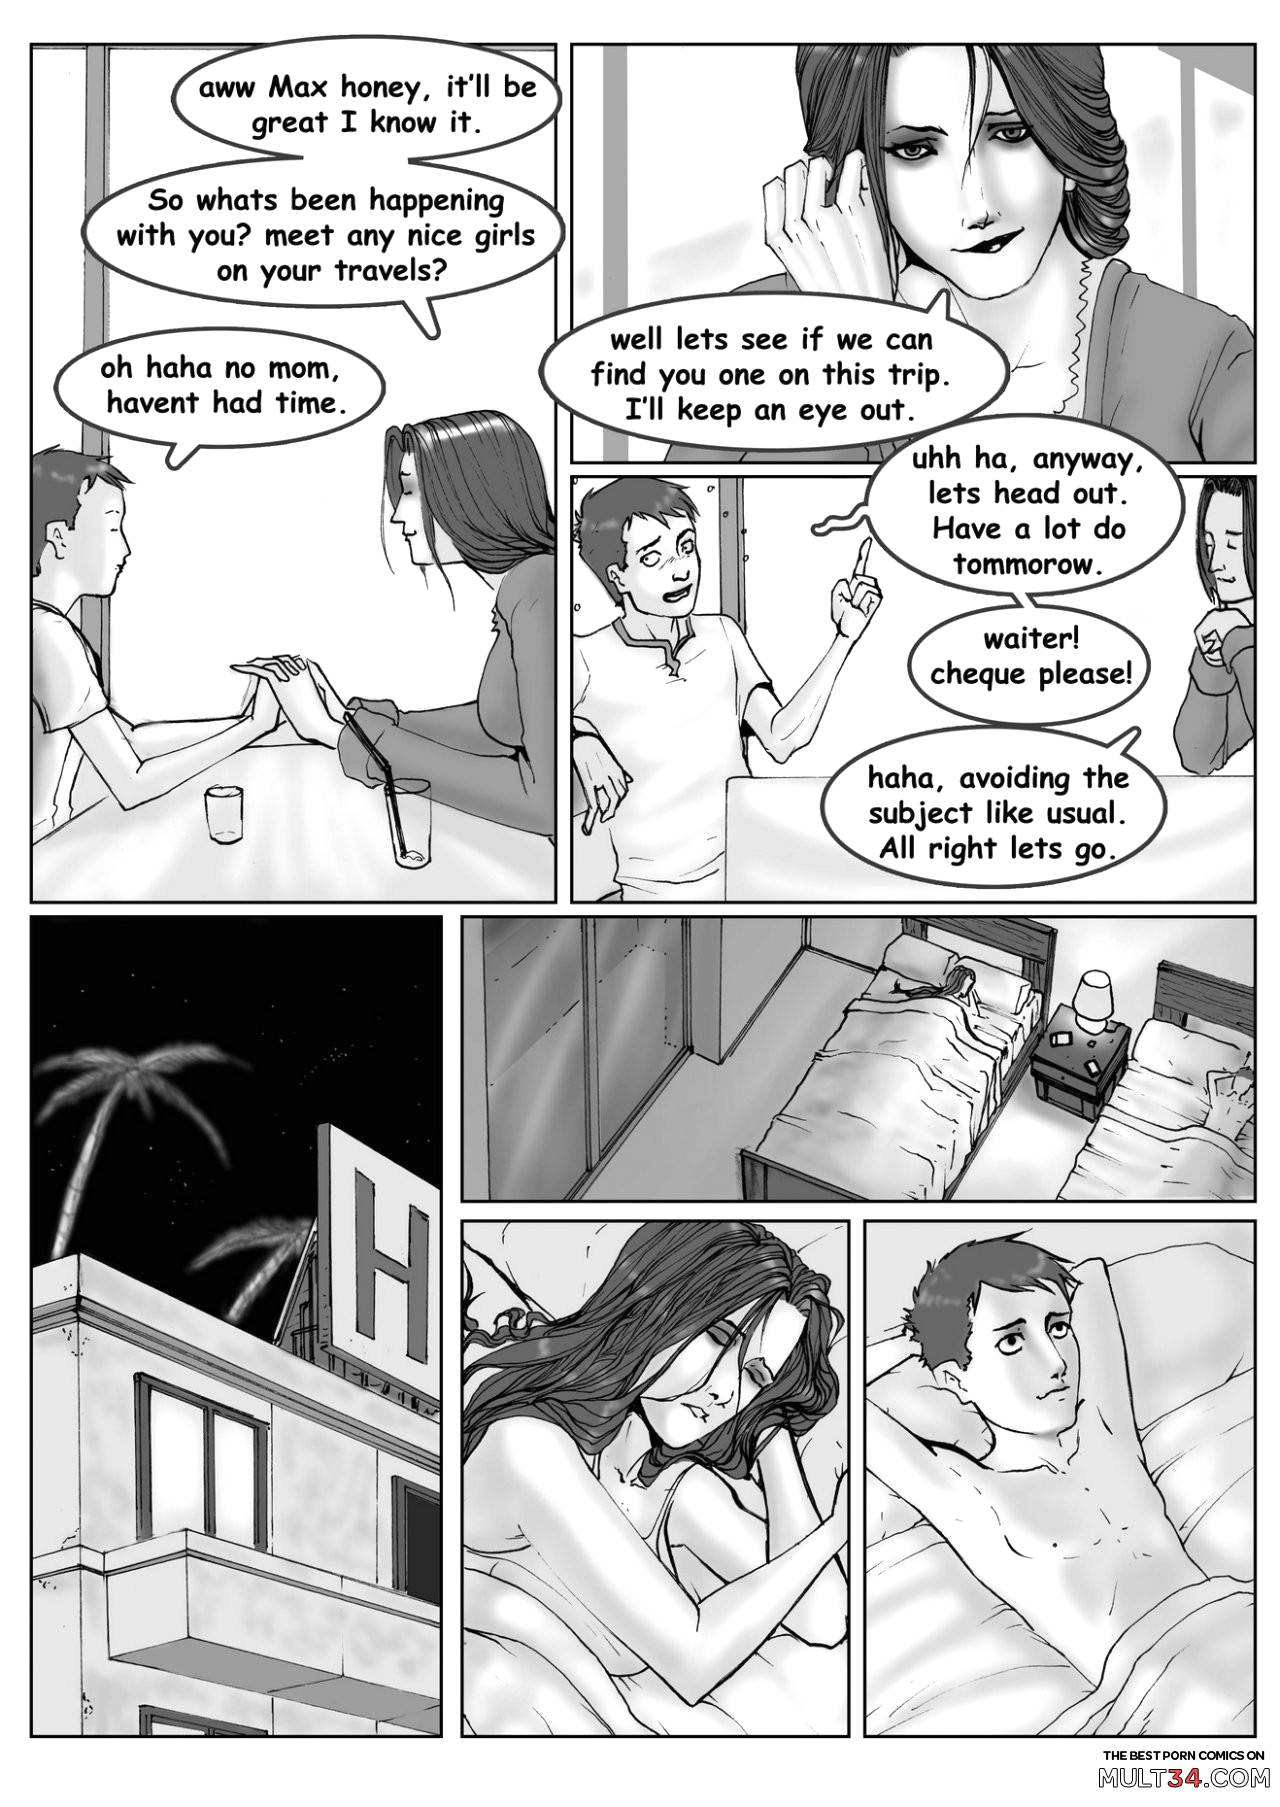 Max and Maddie's Island Quest: Part 1: Jocasta page 5